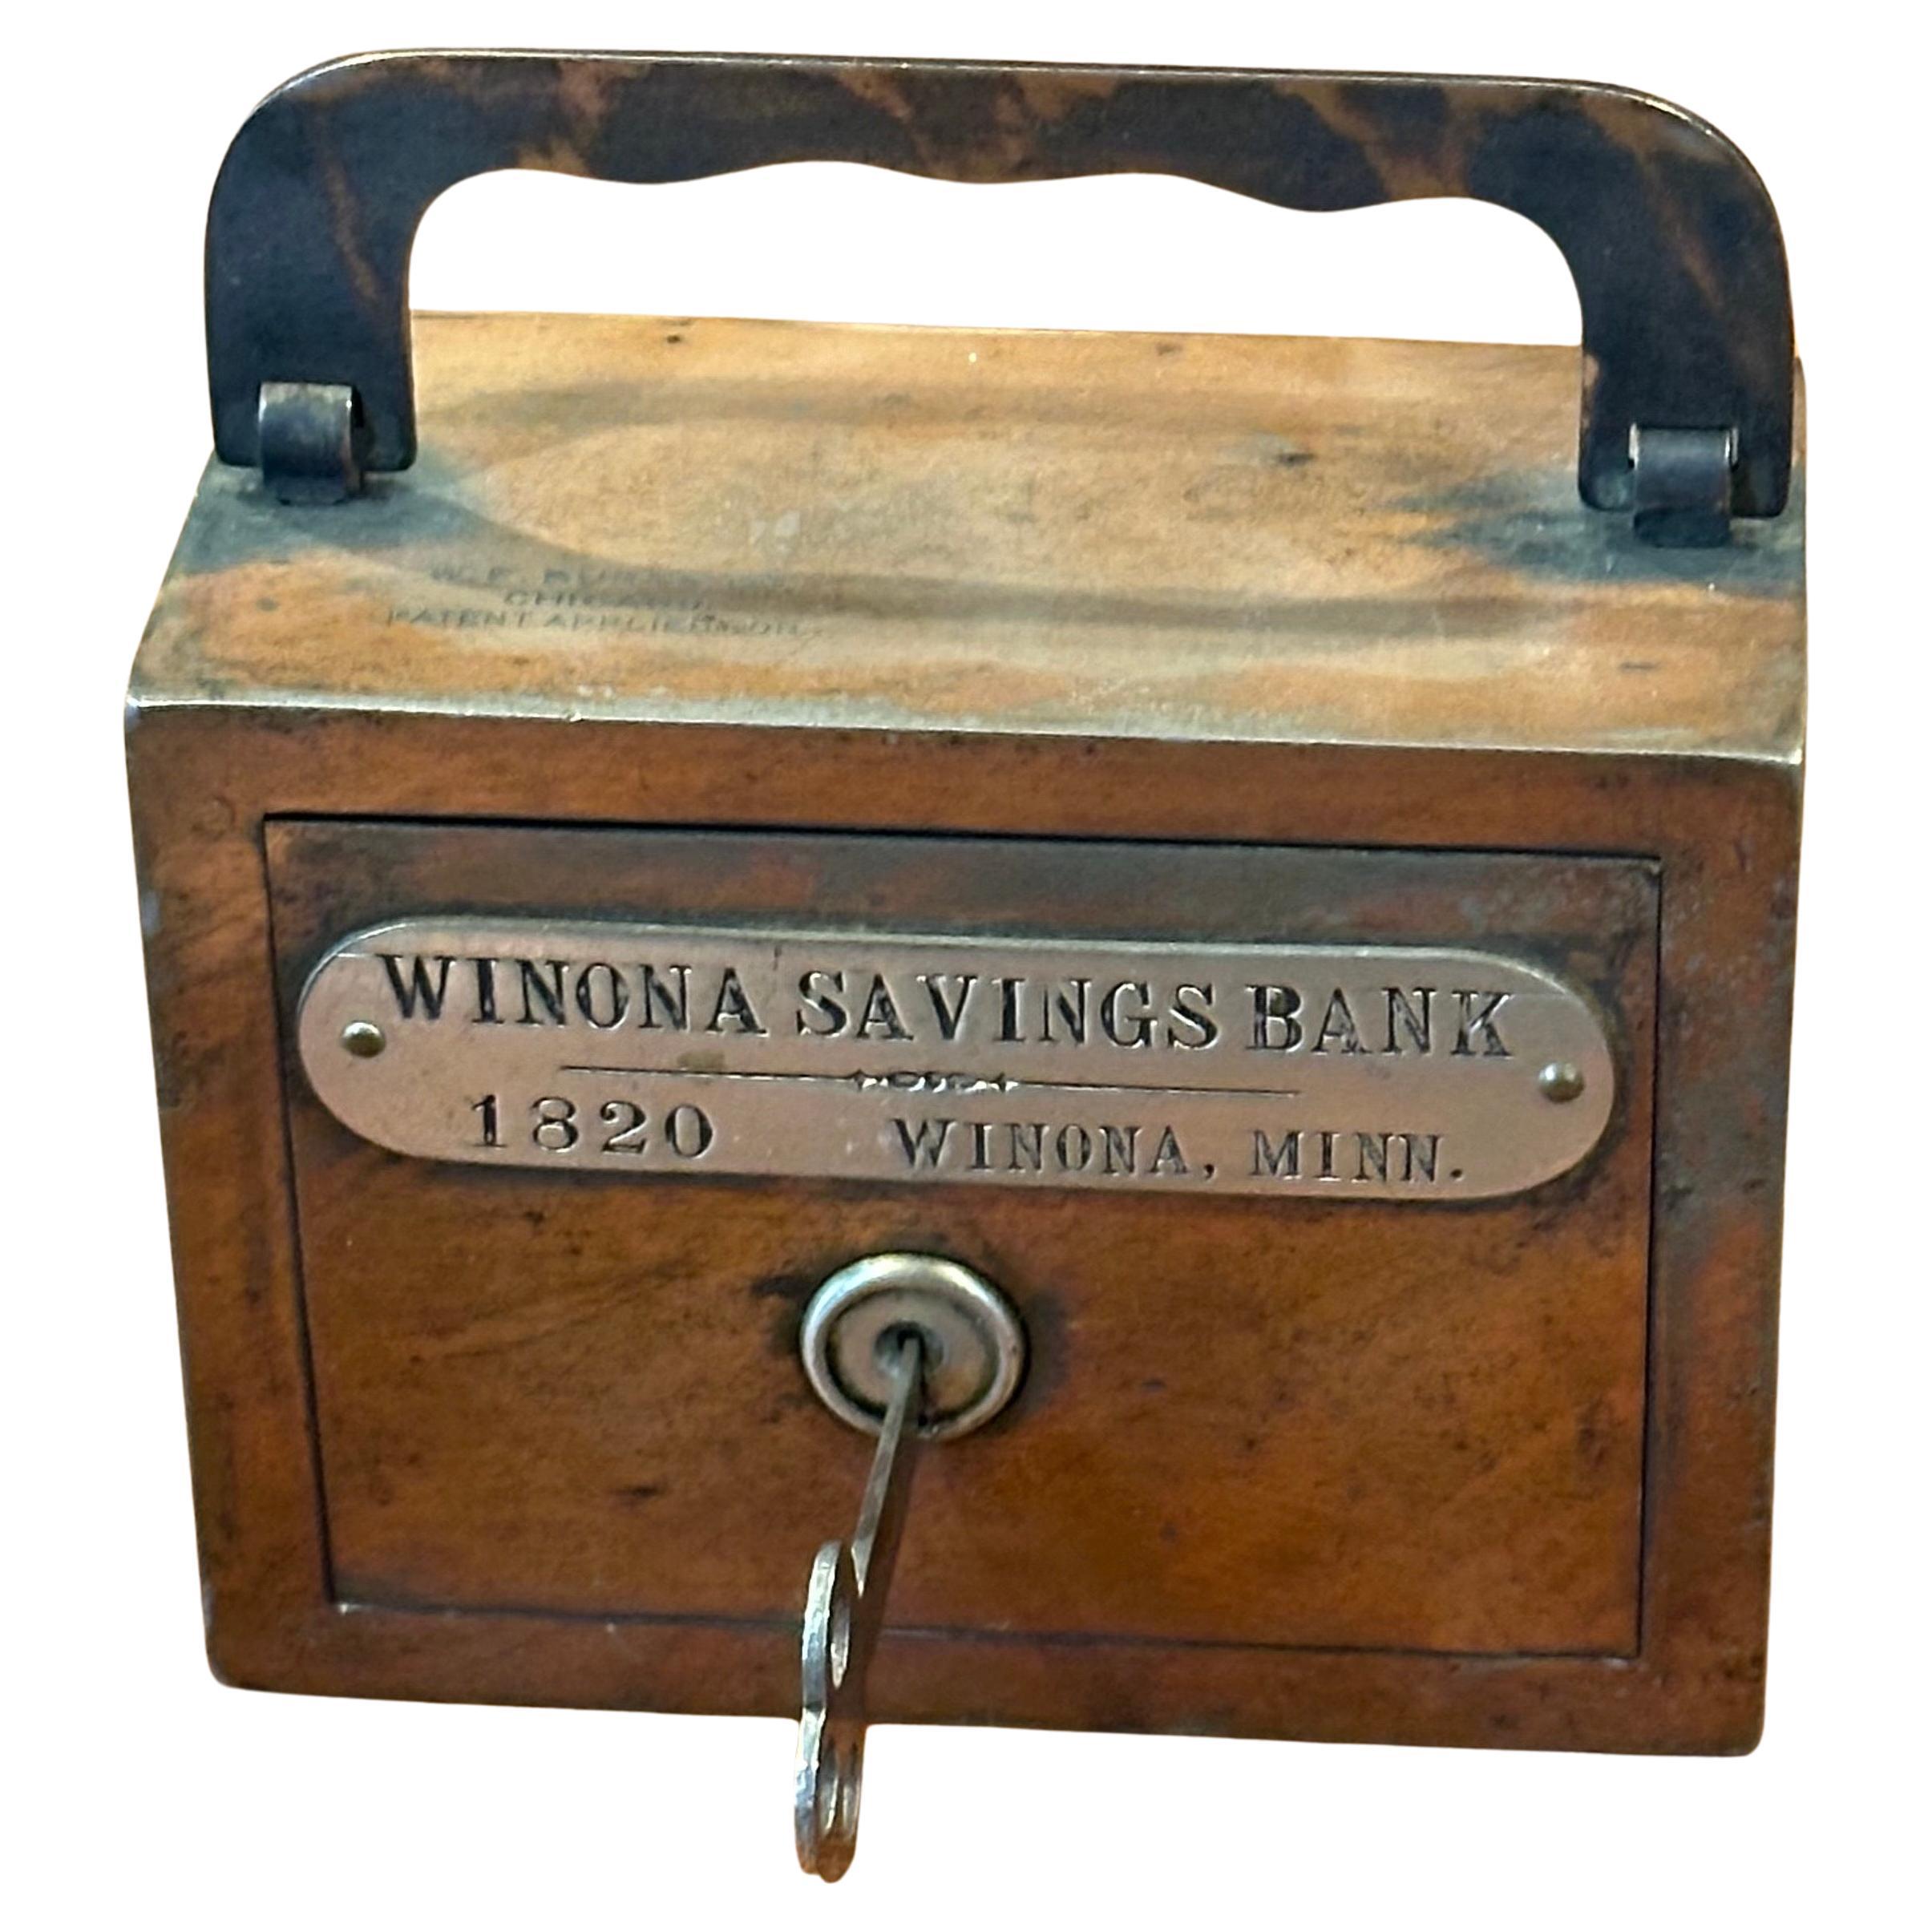 Vintage Winona Savings Bank of Minnesota money box with key, circa 1930s. The box is in good vintage condition and measures 4.5